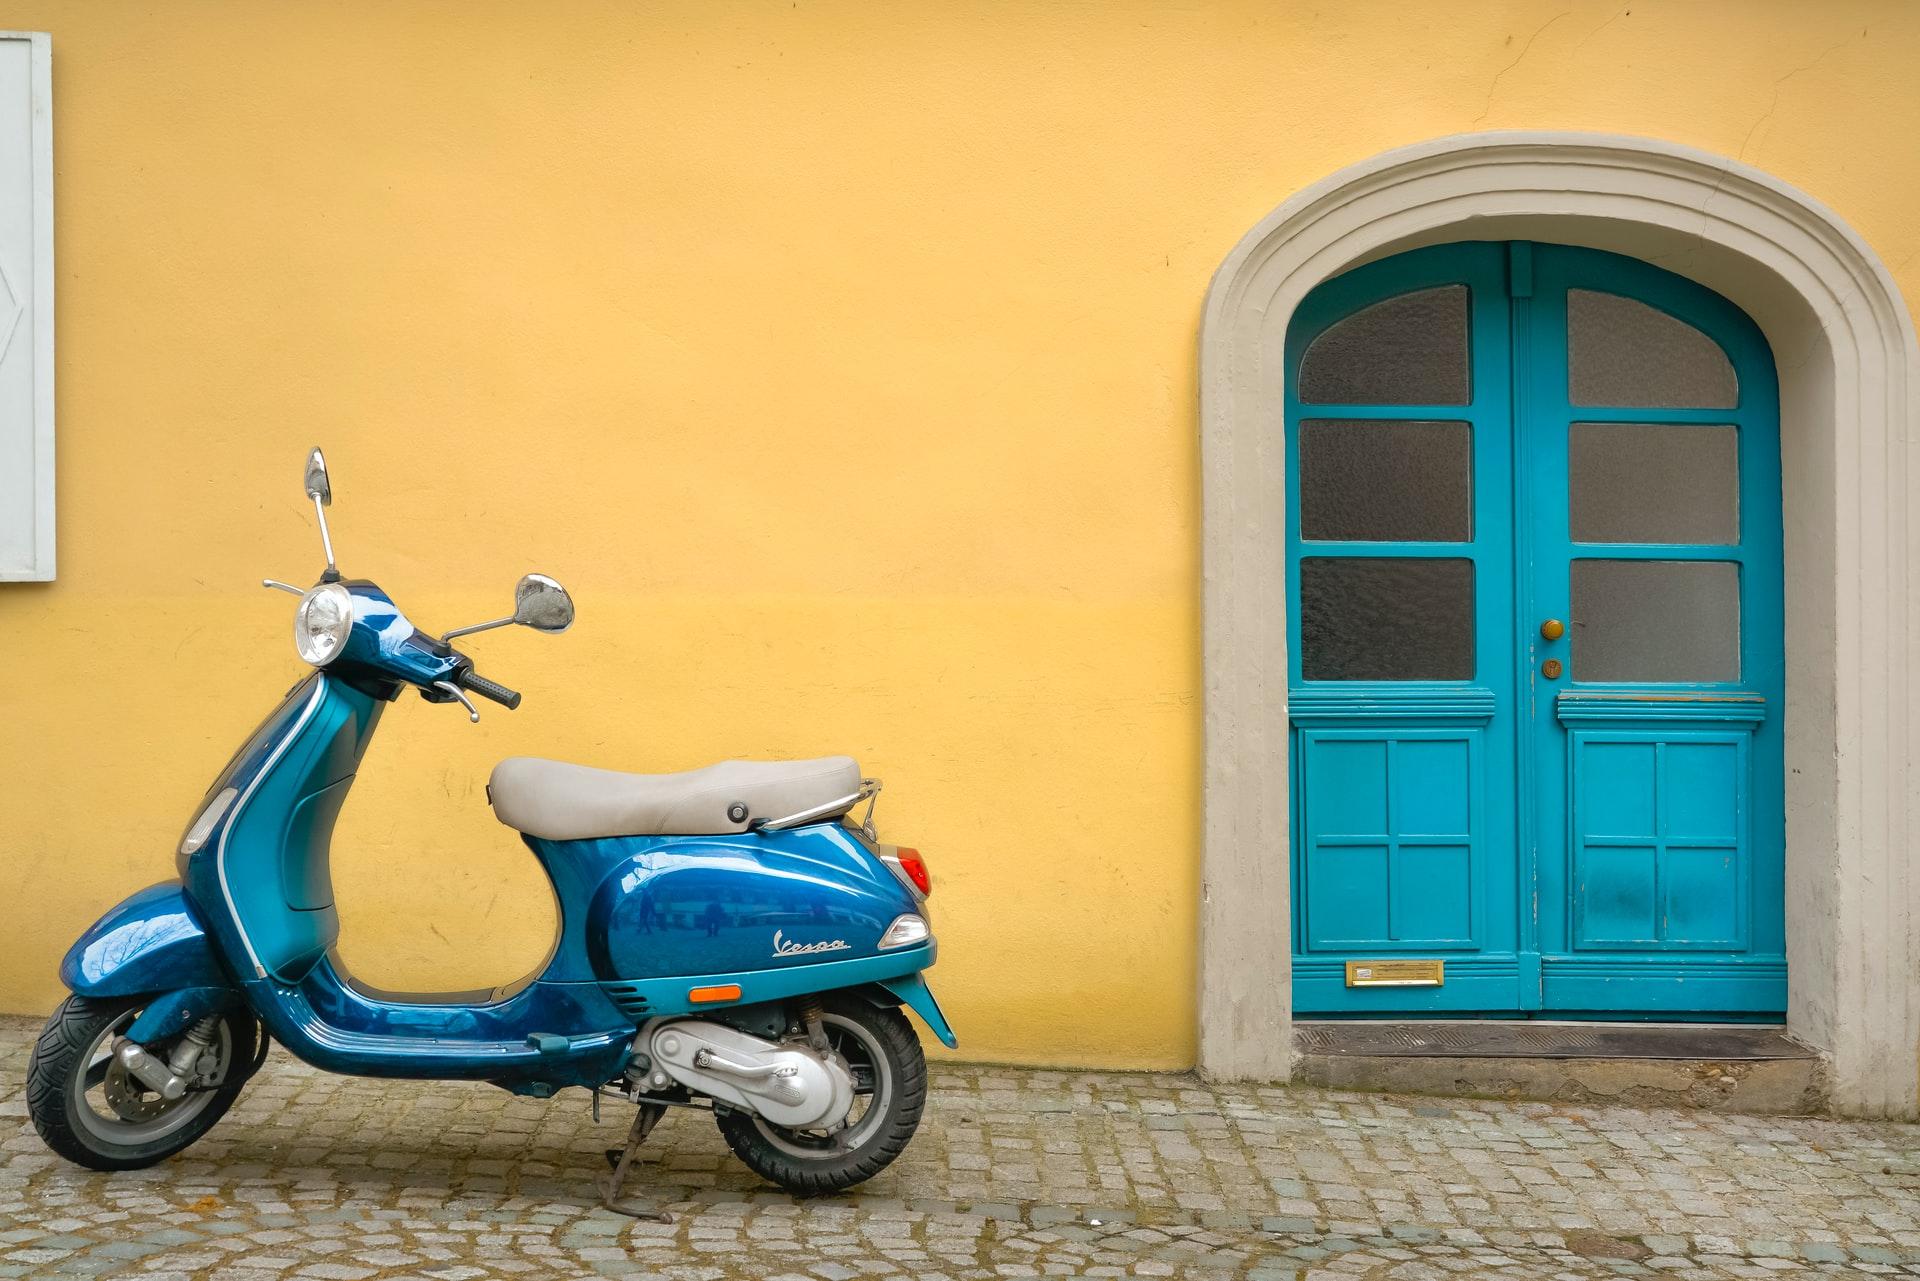 Vespa scooters are one of the most iconic vehicles in Europe.